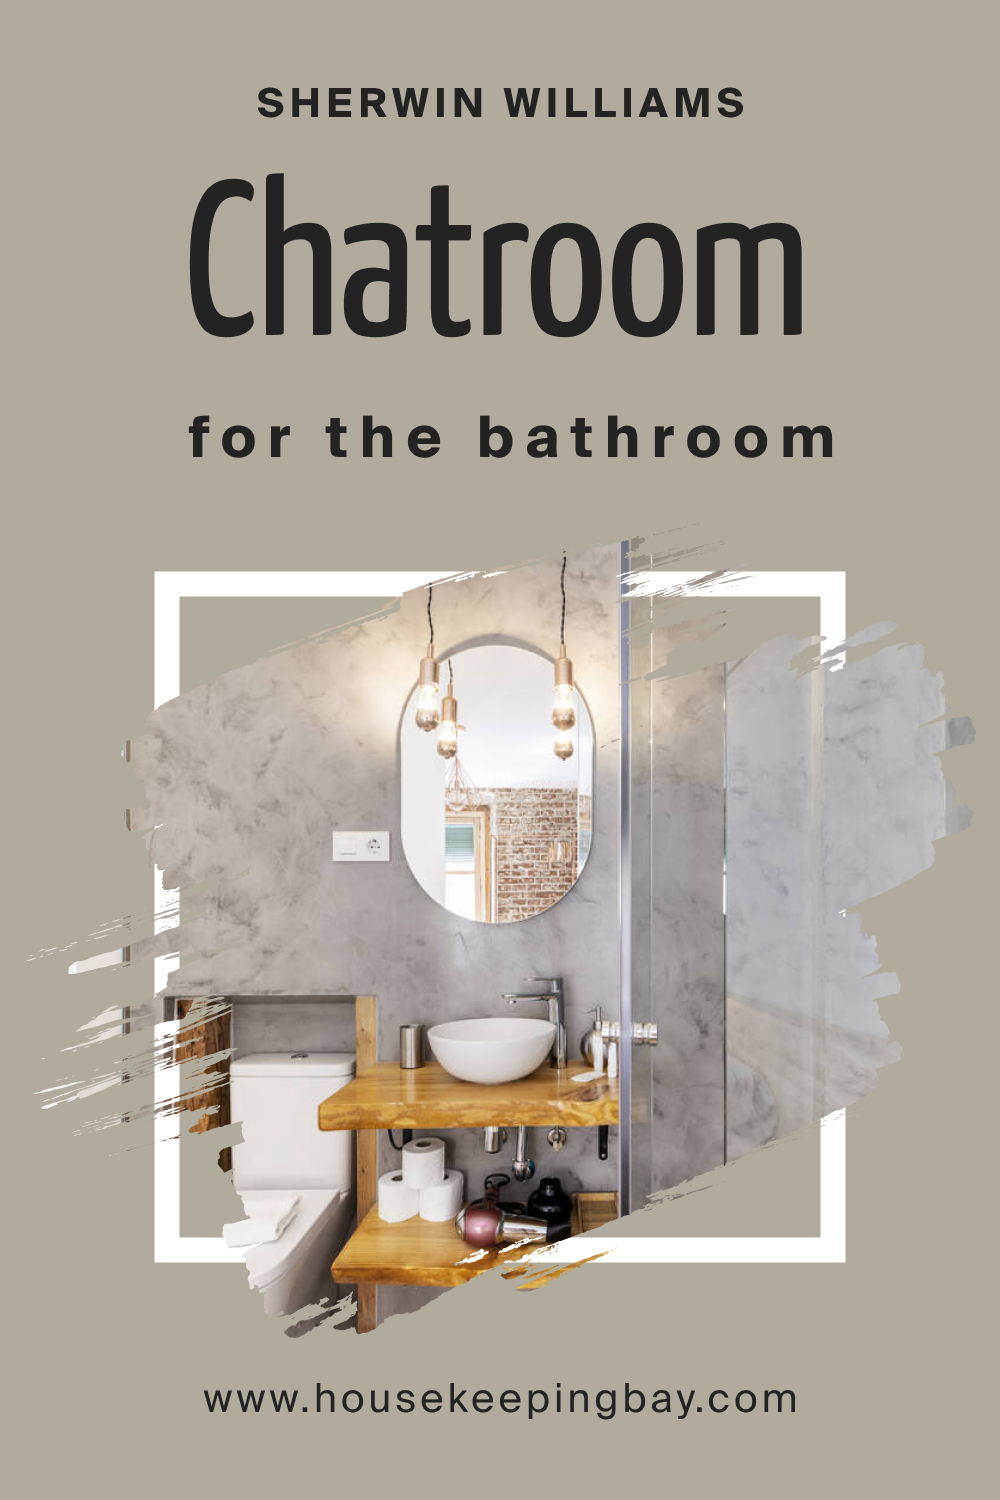 Sherwin Williams. SW 6171 Chatroom For the Bathroom